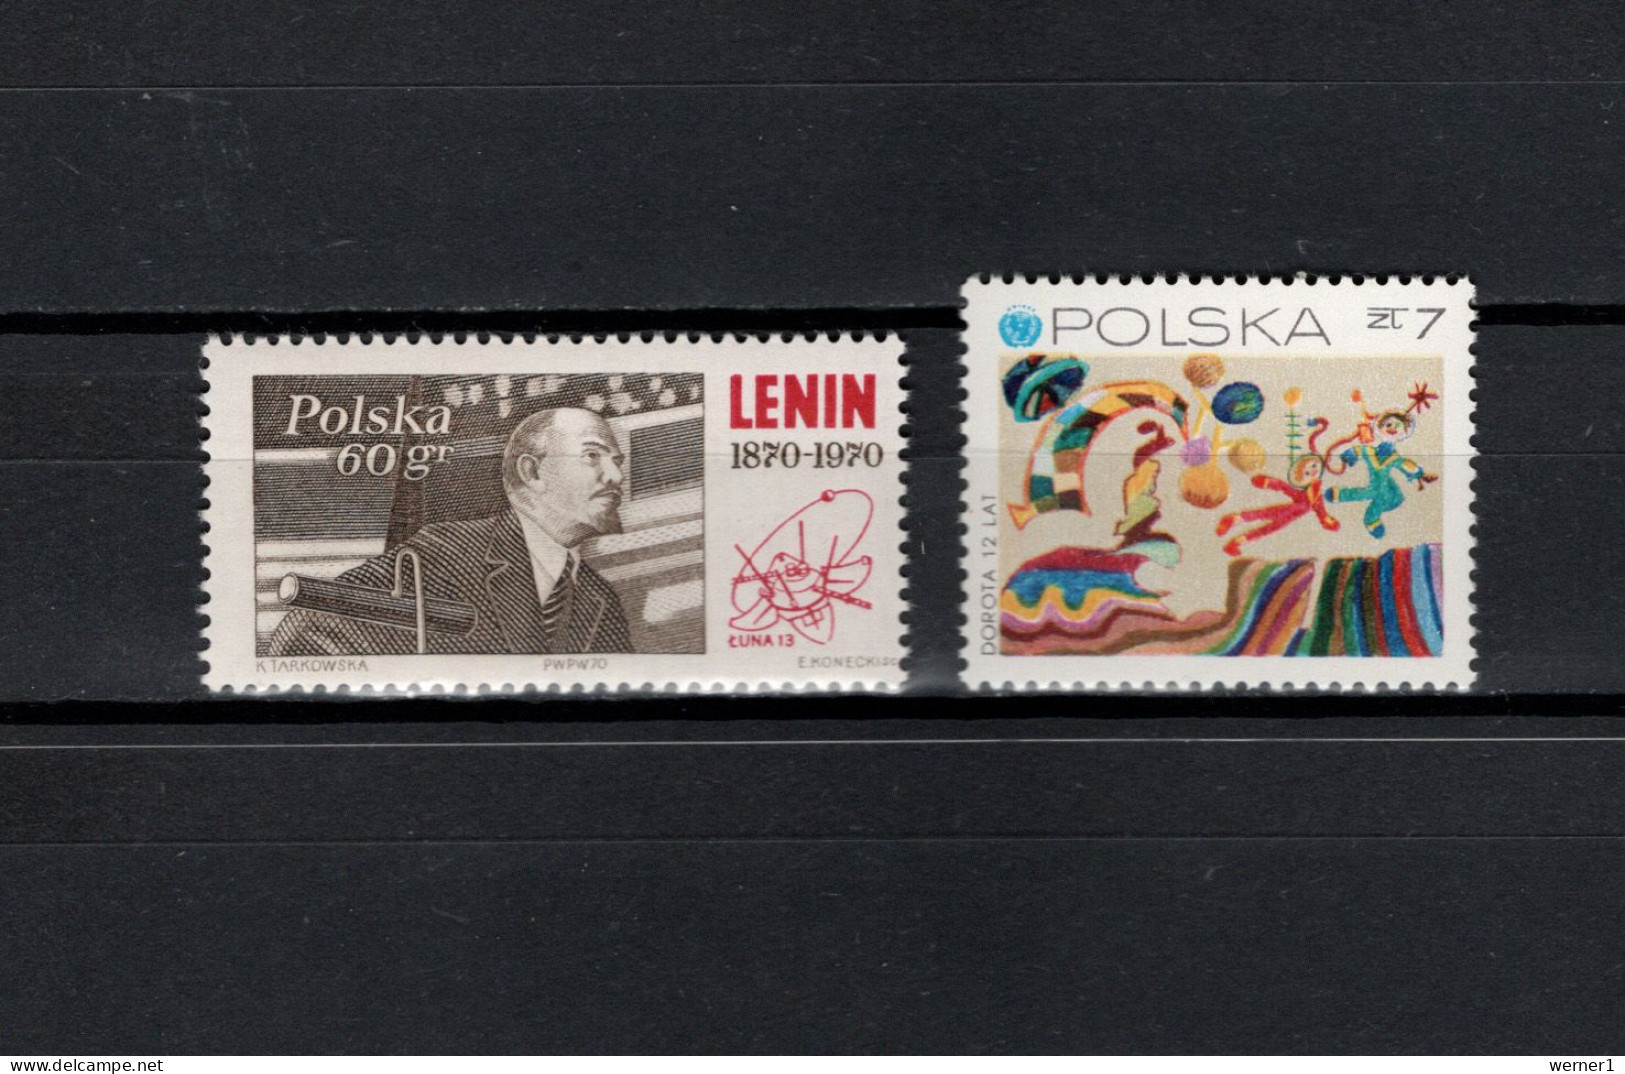 Poland 1970/1971 Space, Lenin. Children Painting 2 Stamps MNH - Europa